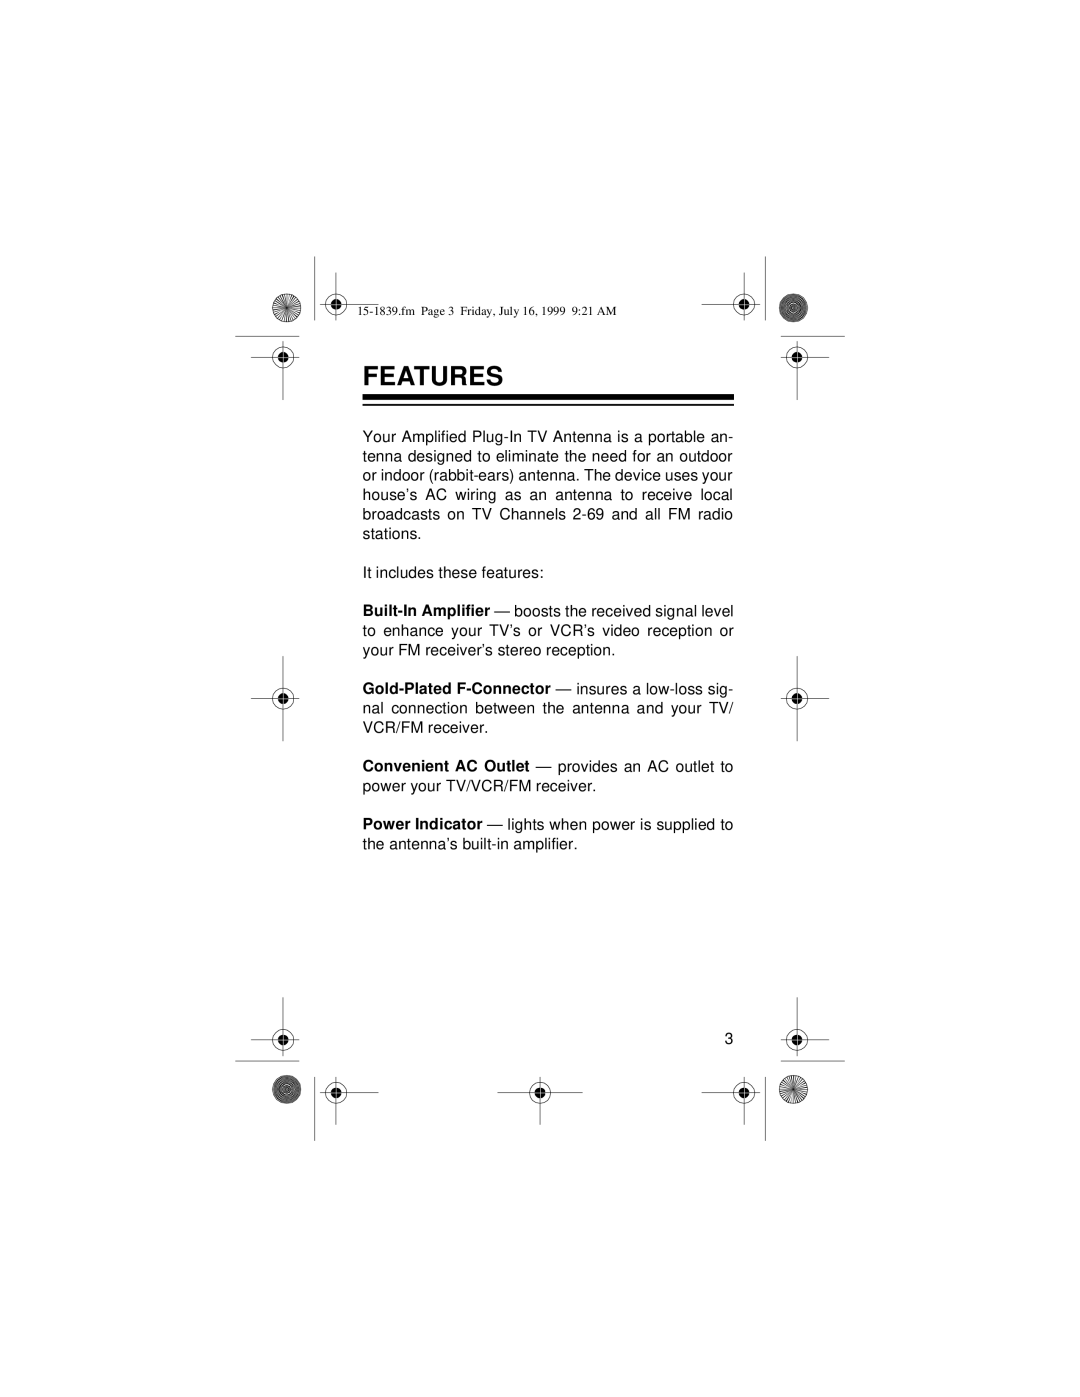 Radio Shack TV ANTENNA owner manual Features 